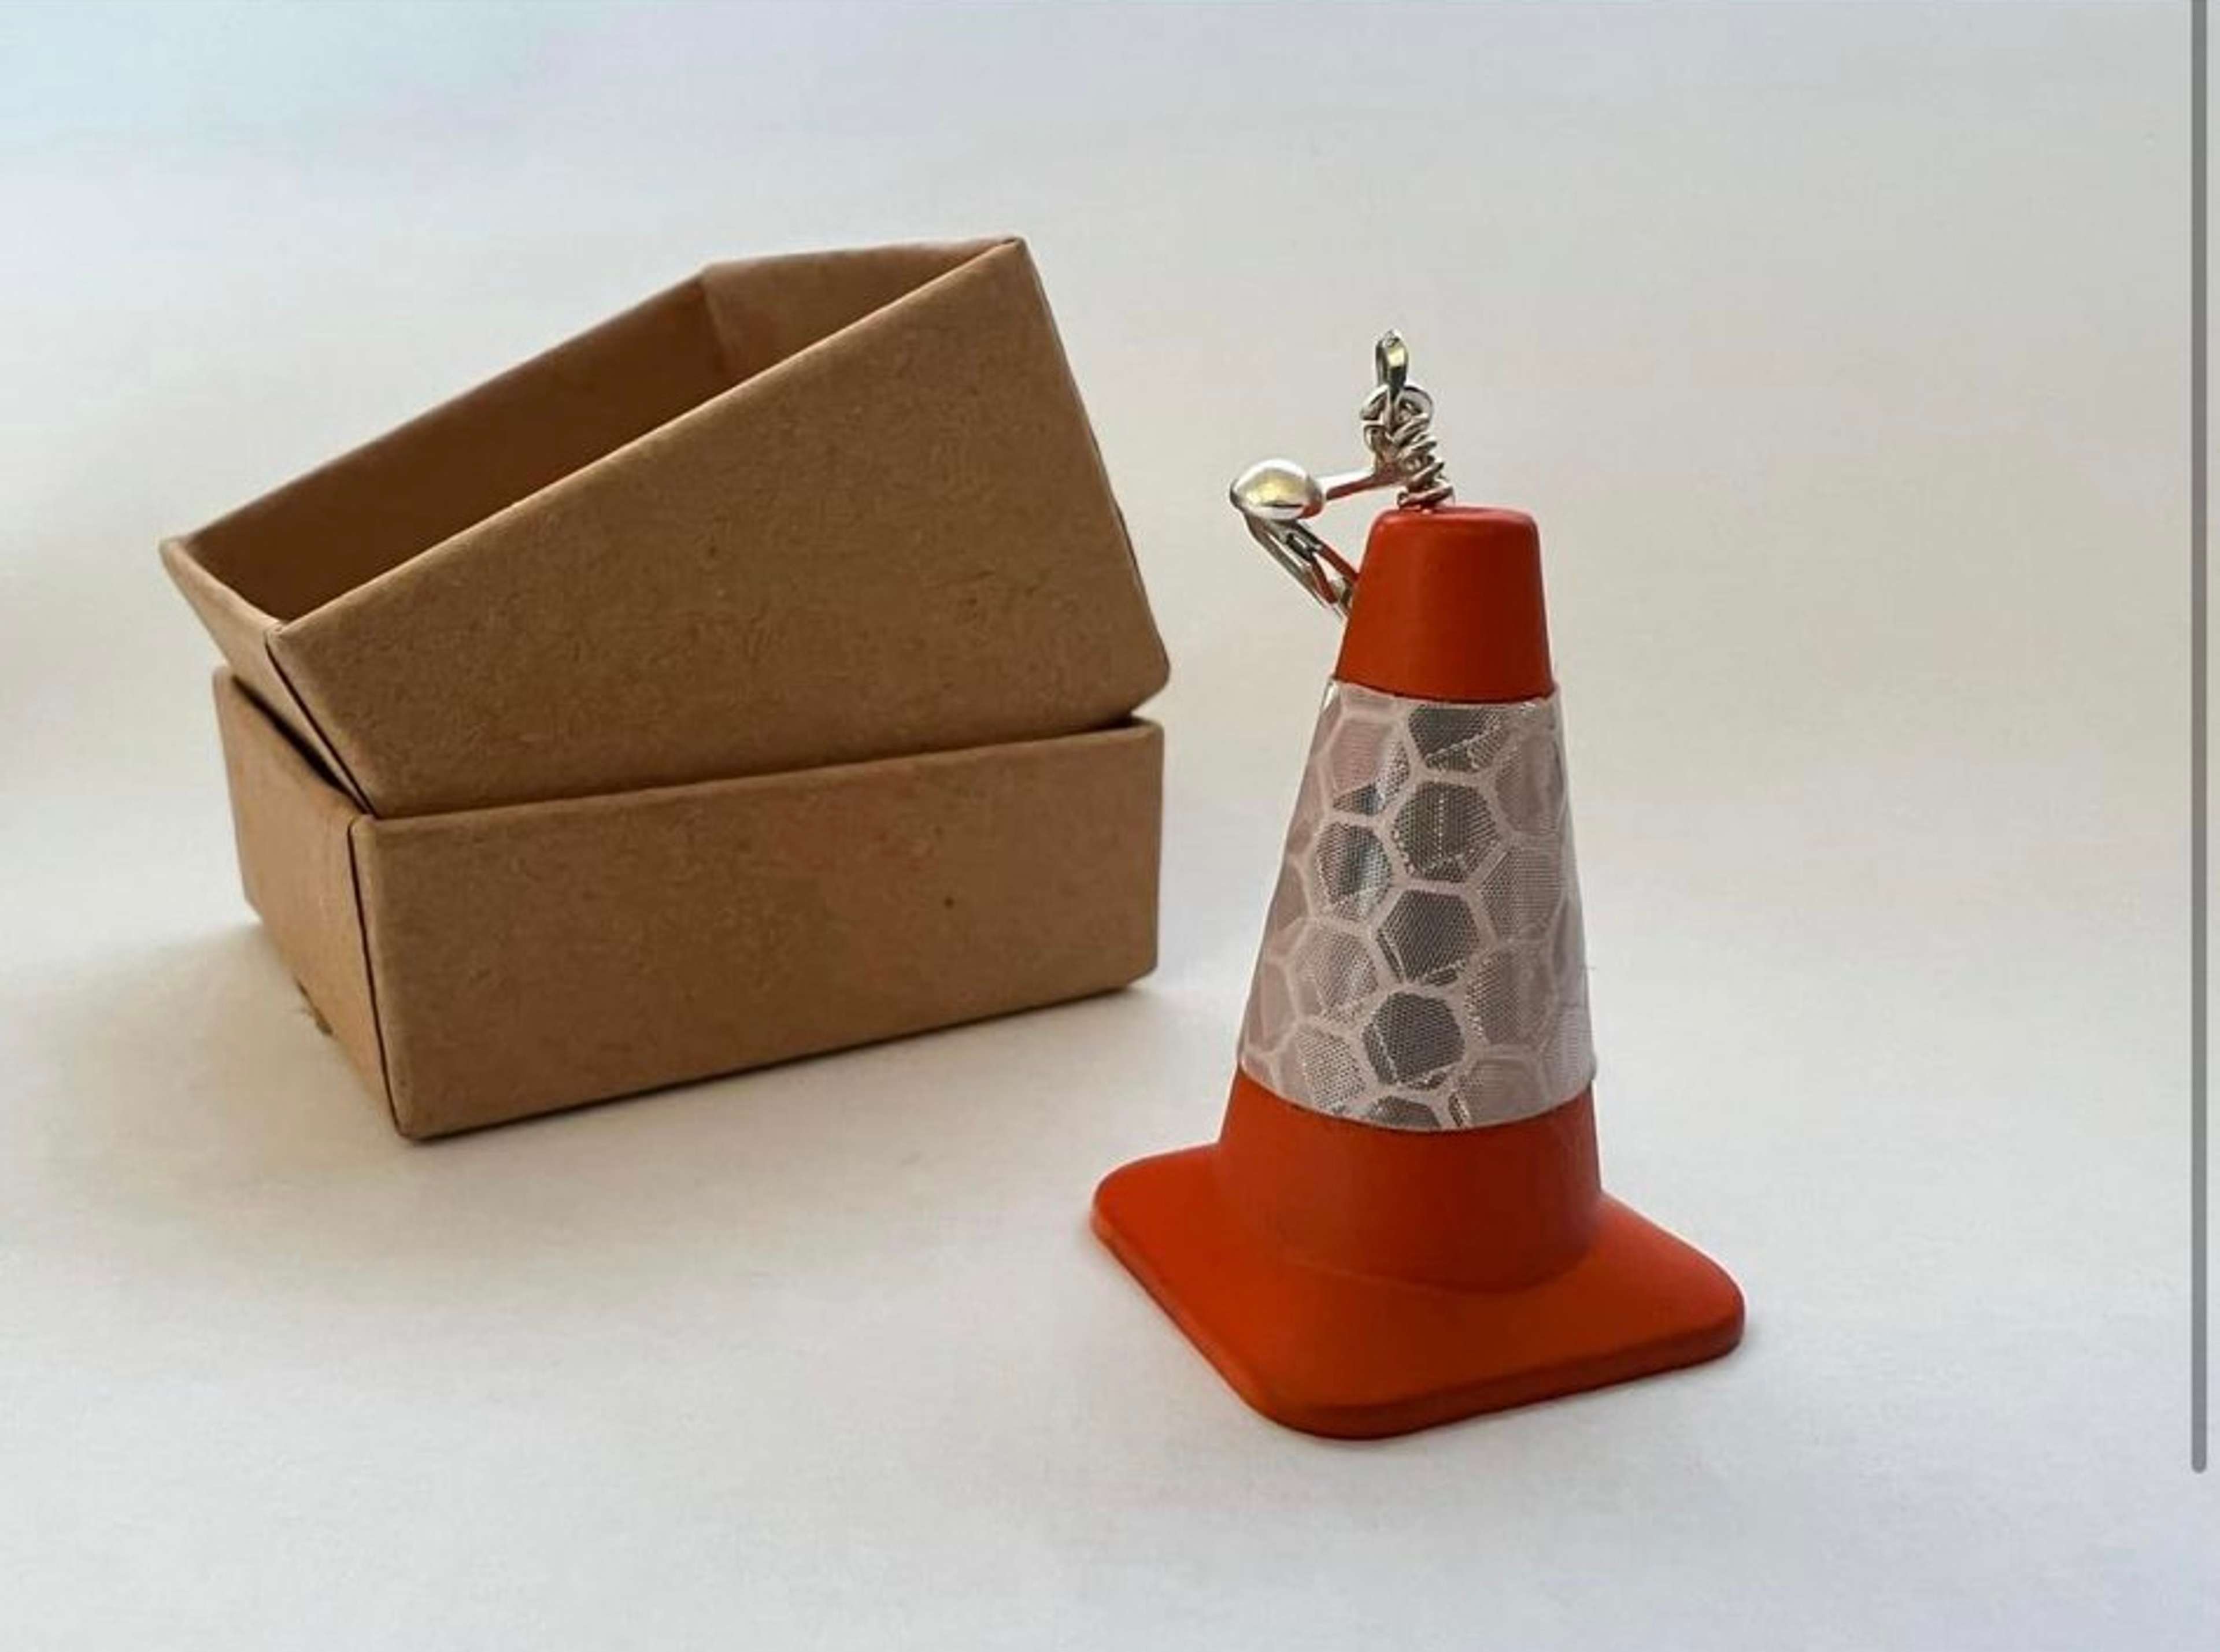 A photograph of a novelty earring in the shape of an orange traffic cone, next to a small box